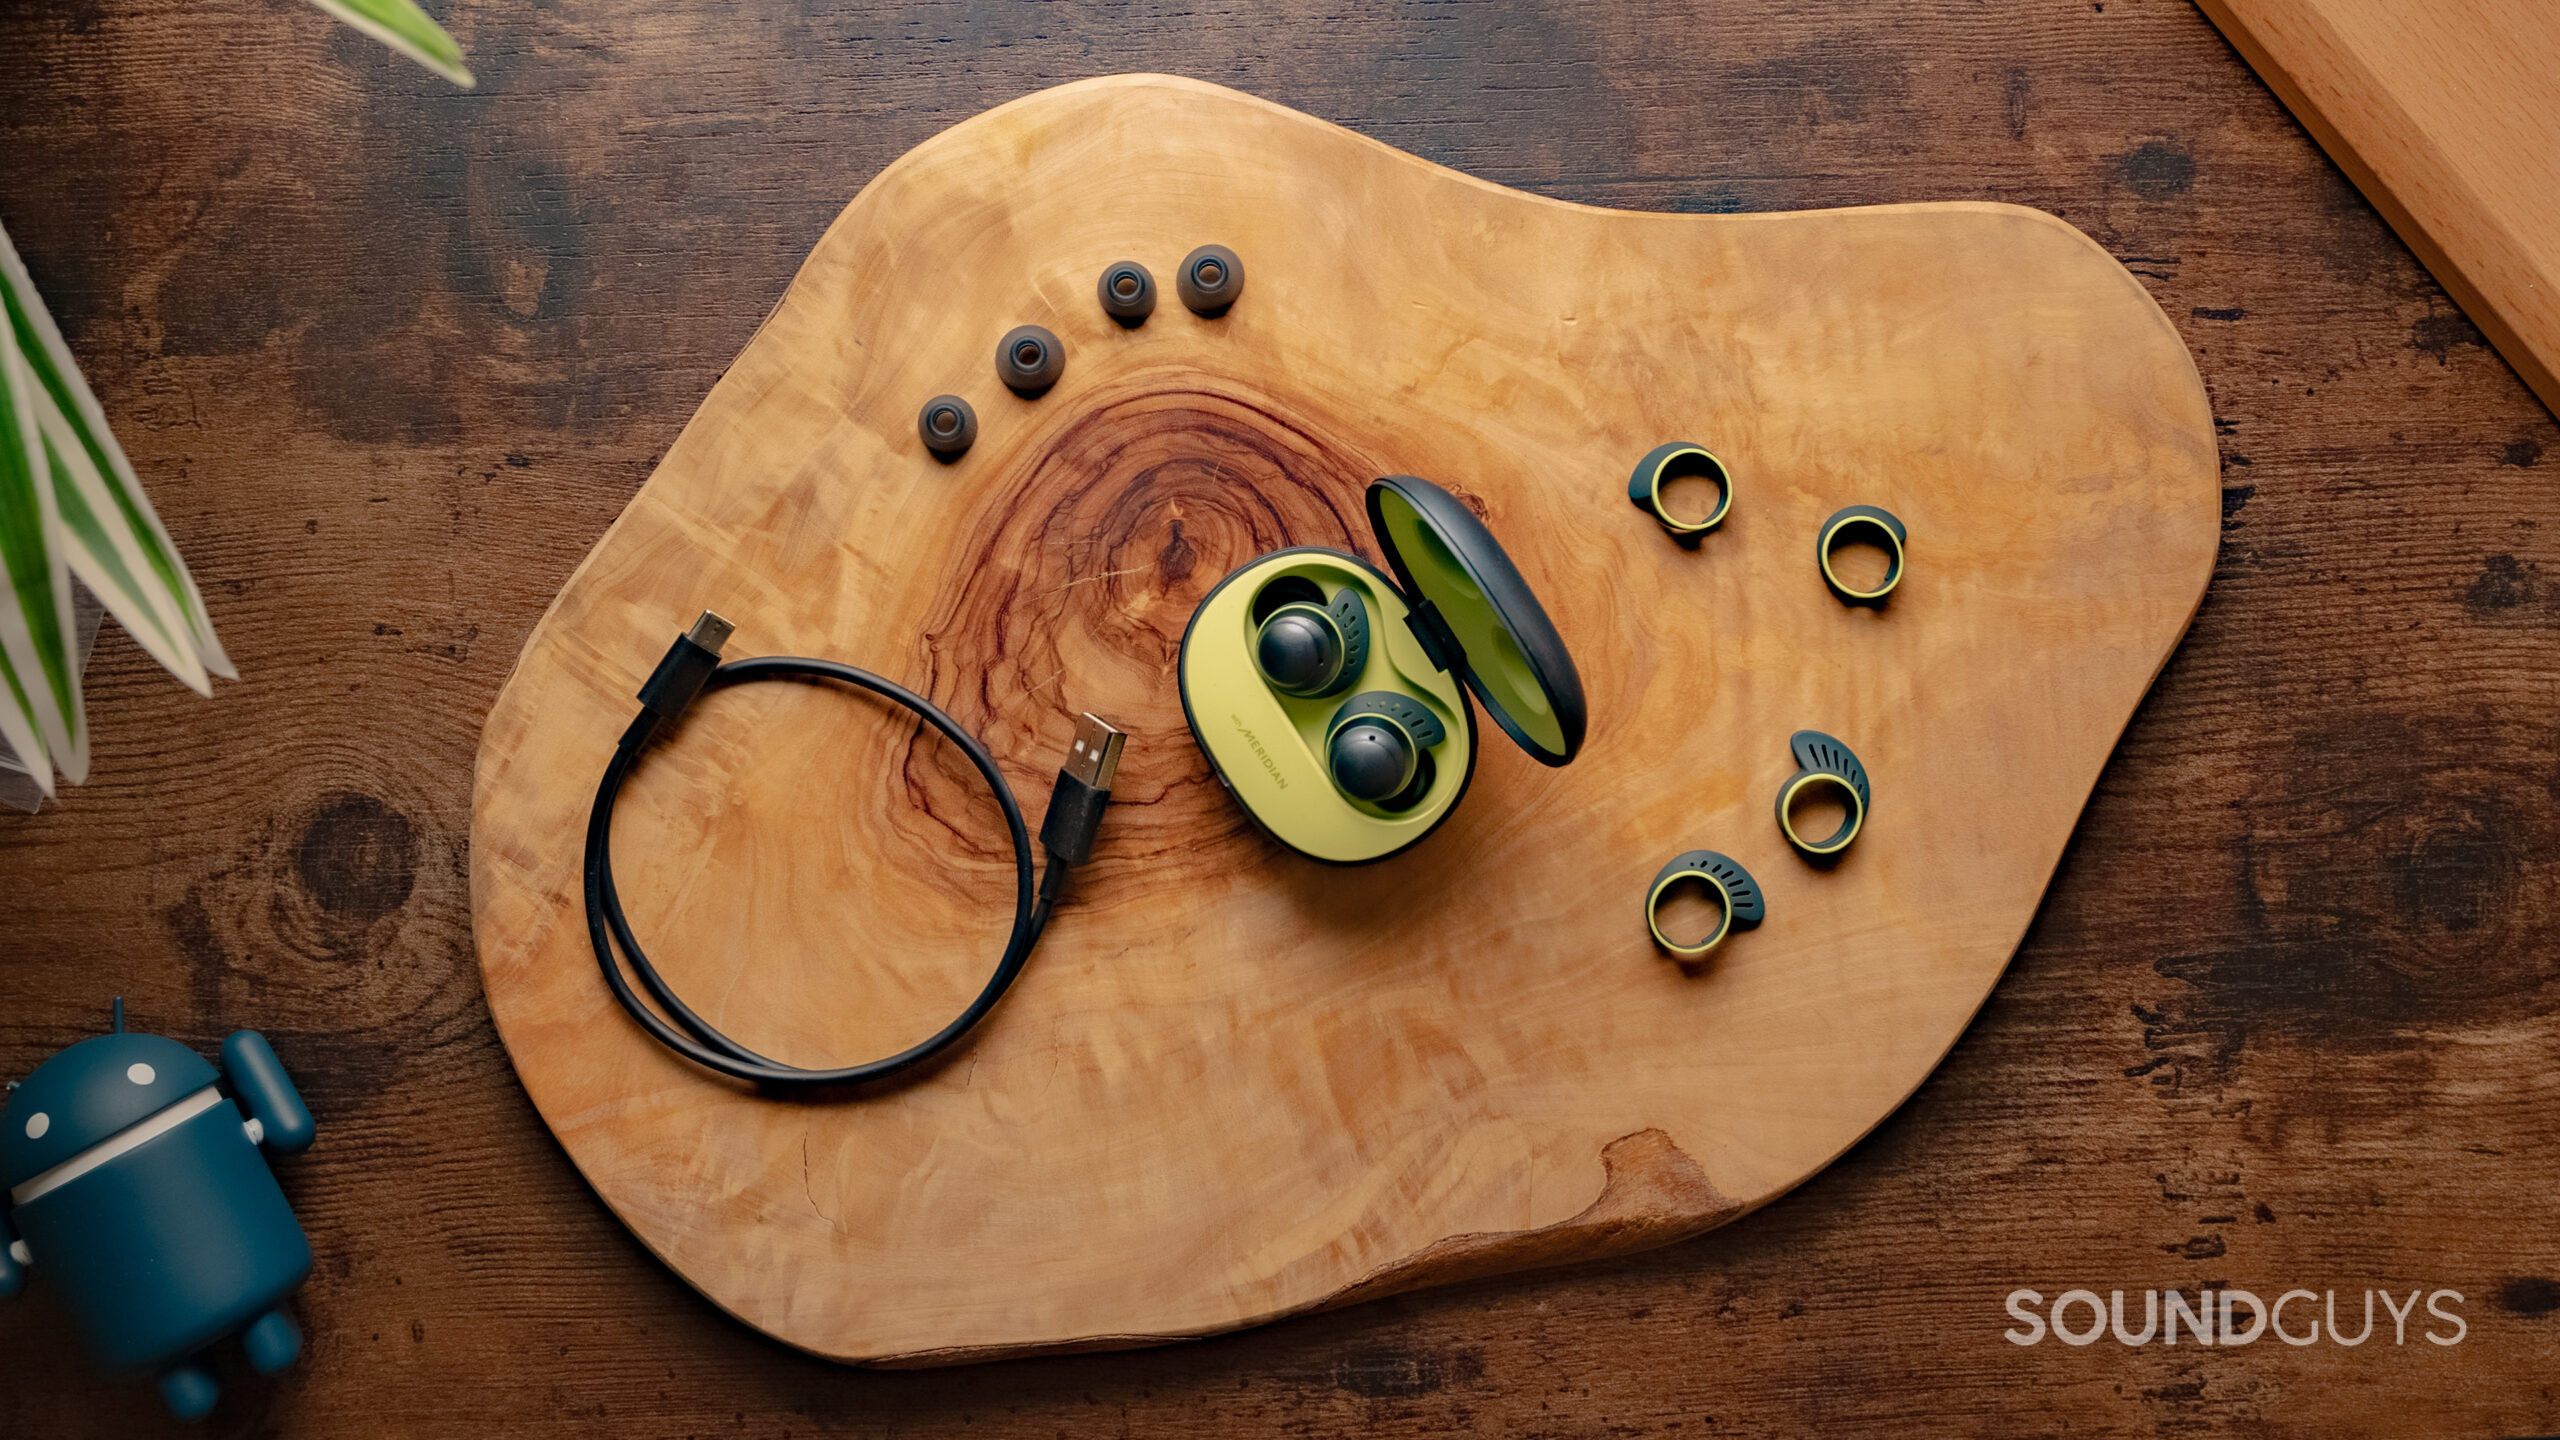 A bird's eye perspective showing the LG TONE Free fit TF7 and the USB-C cable, ear tips, and wings all on a wood surface.